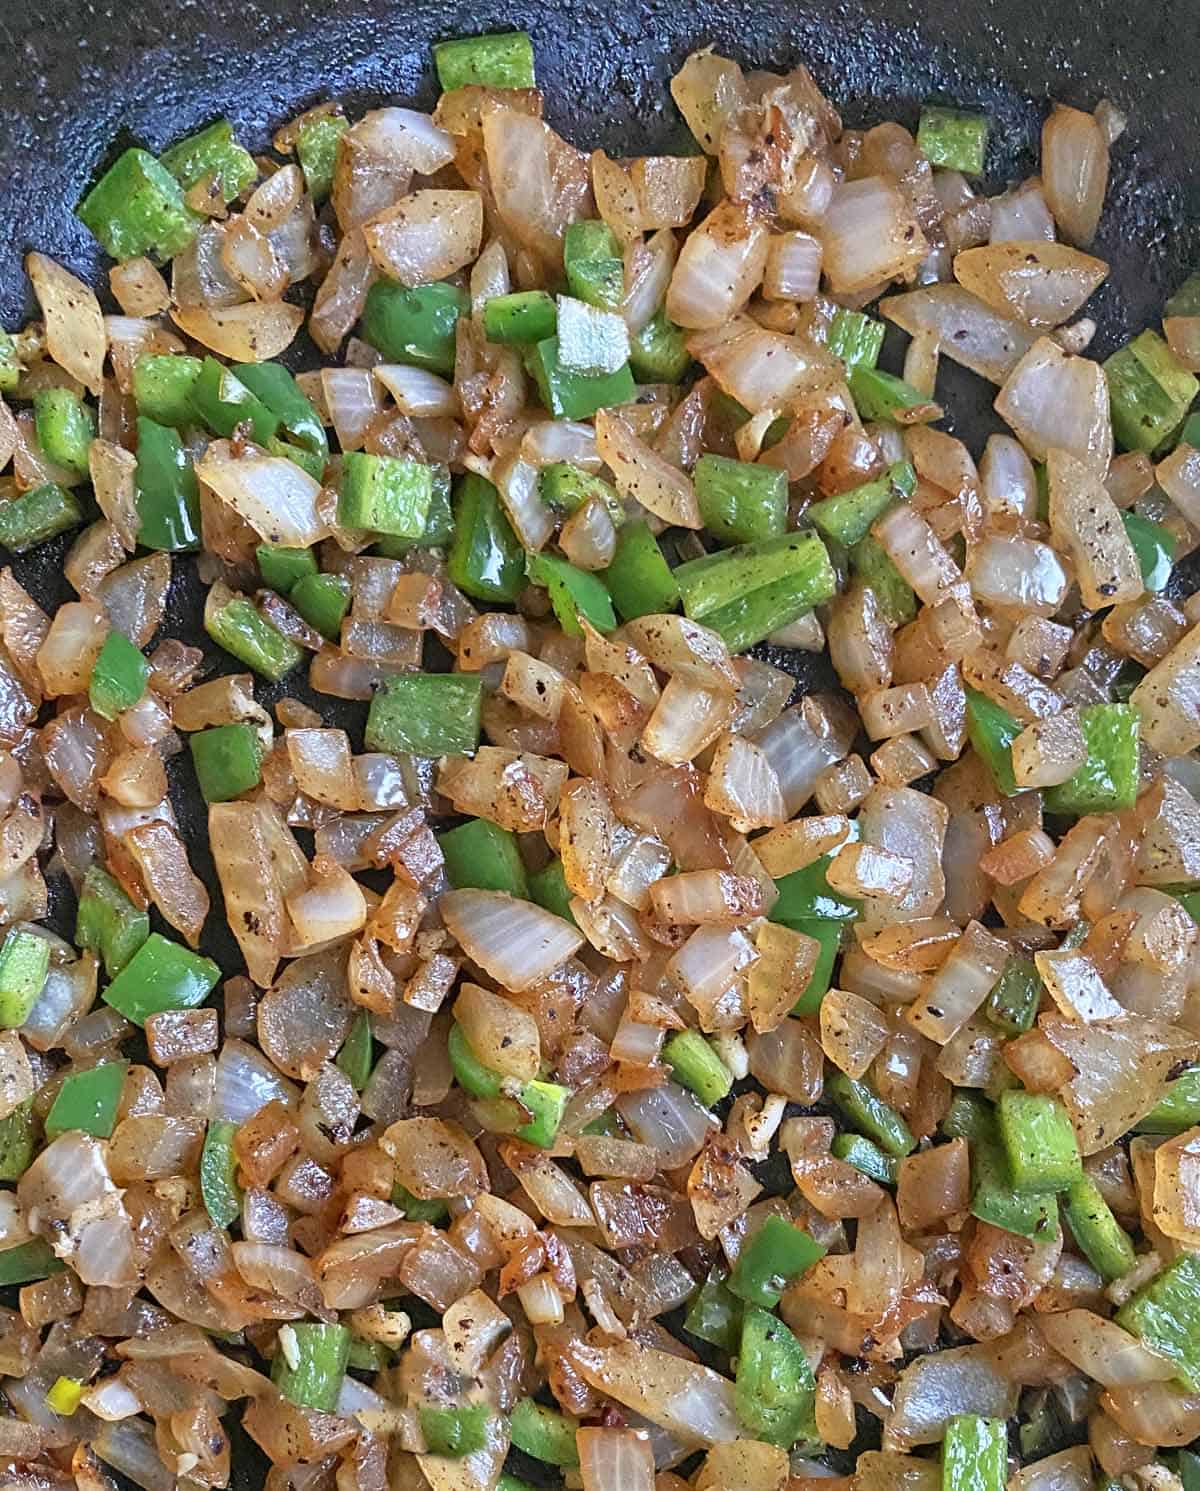 Chopped onions and jalapenos cooking in a skillet.